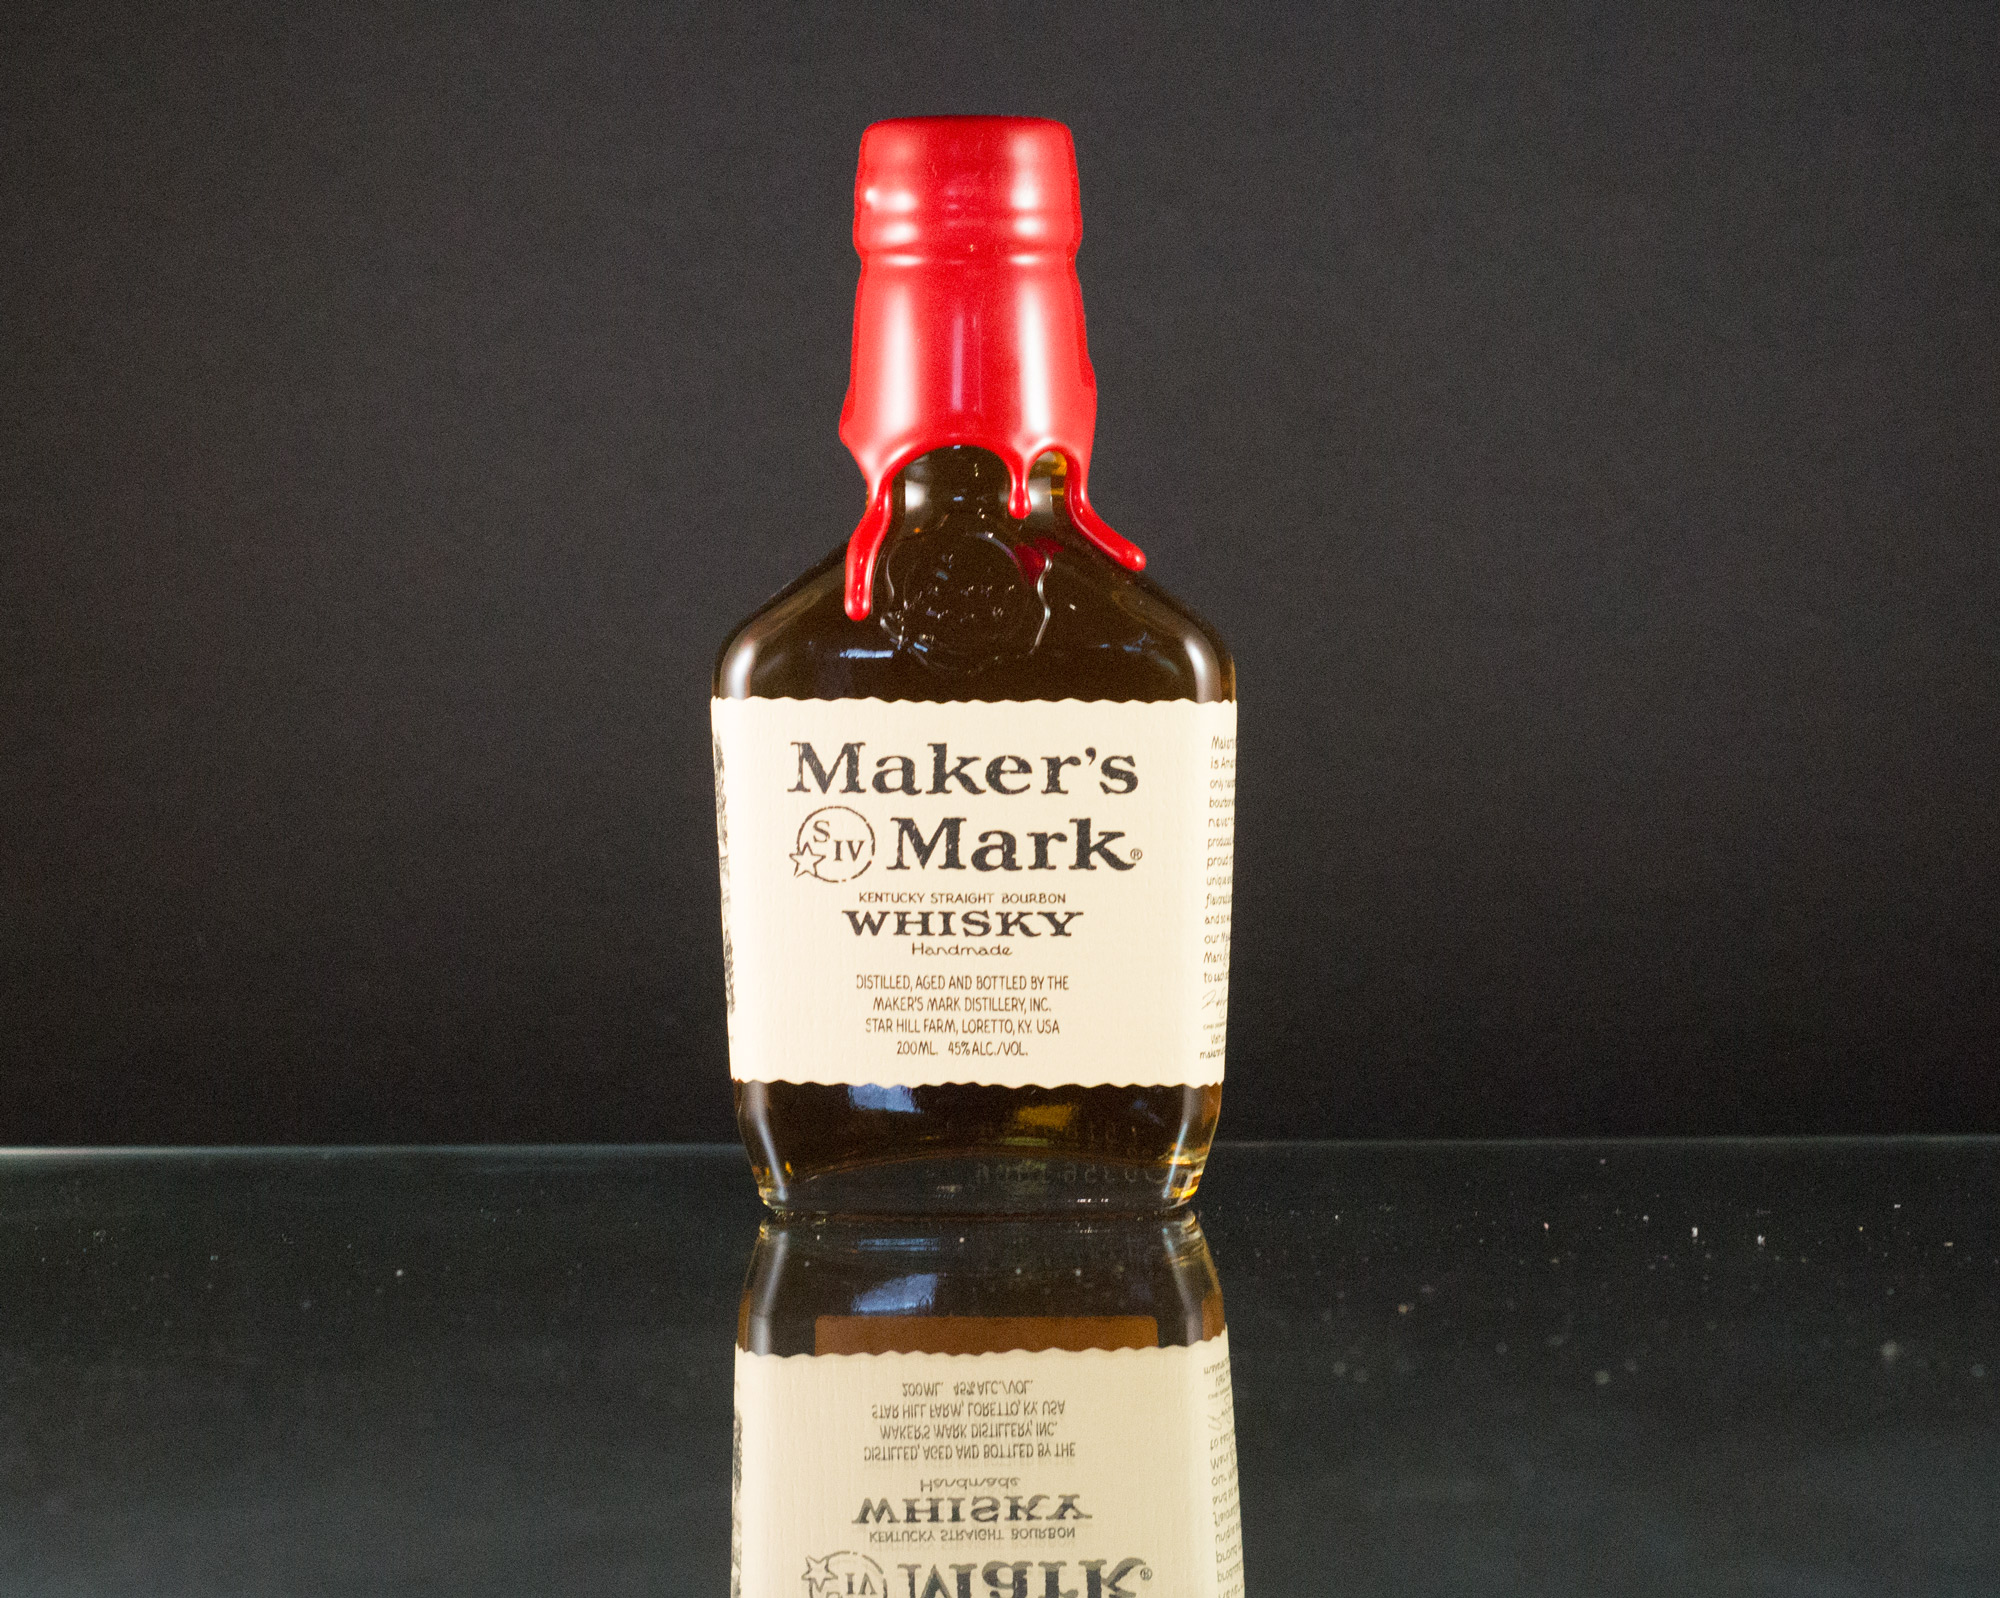 Maker's Mark vs Jack Daniels - What Are The Differences?